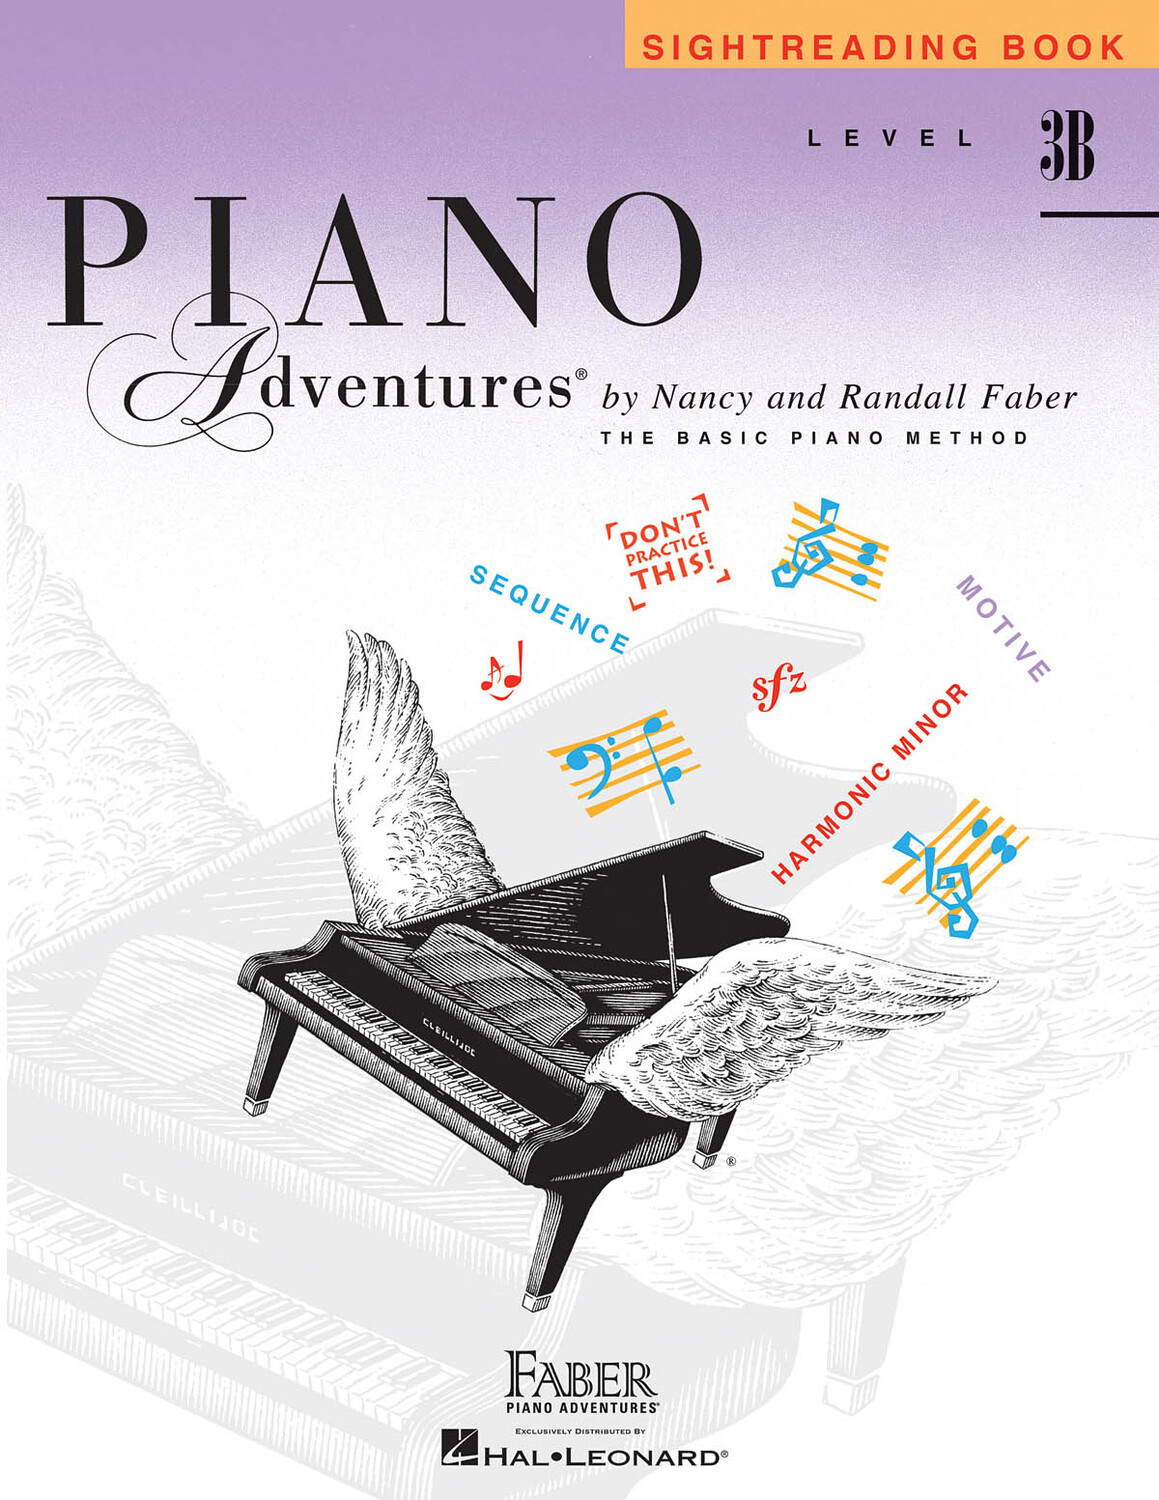 Cover: 888680041618 | Piano Adventures Sightreading Level 3B | Nancy Faber_Randall Faber